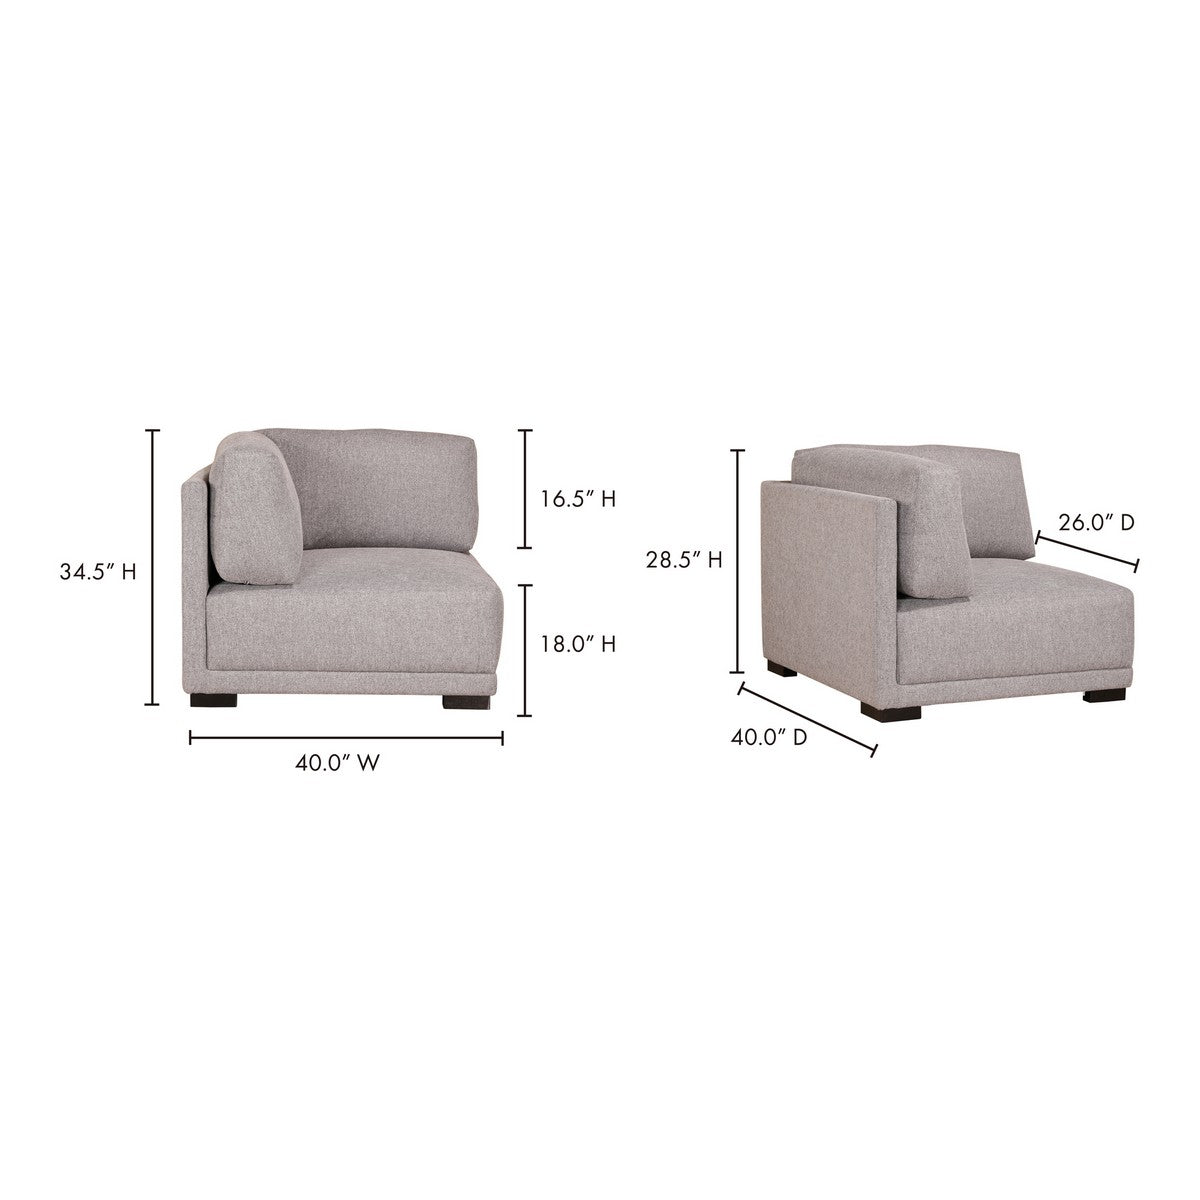 Moe's Home Collection Romeo Corner Chair Grey - RN-1114-29